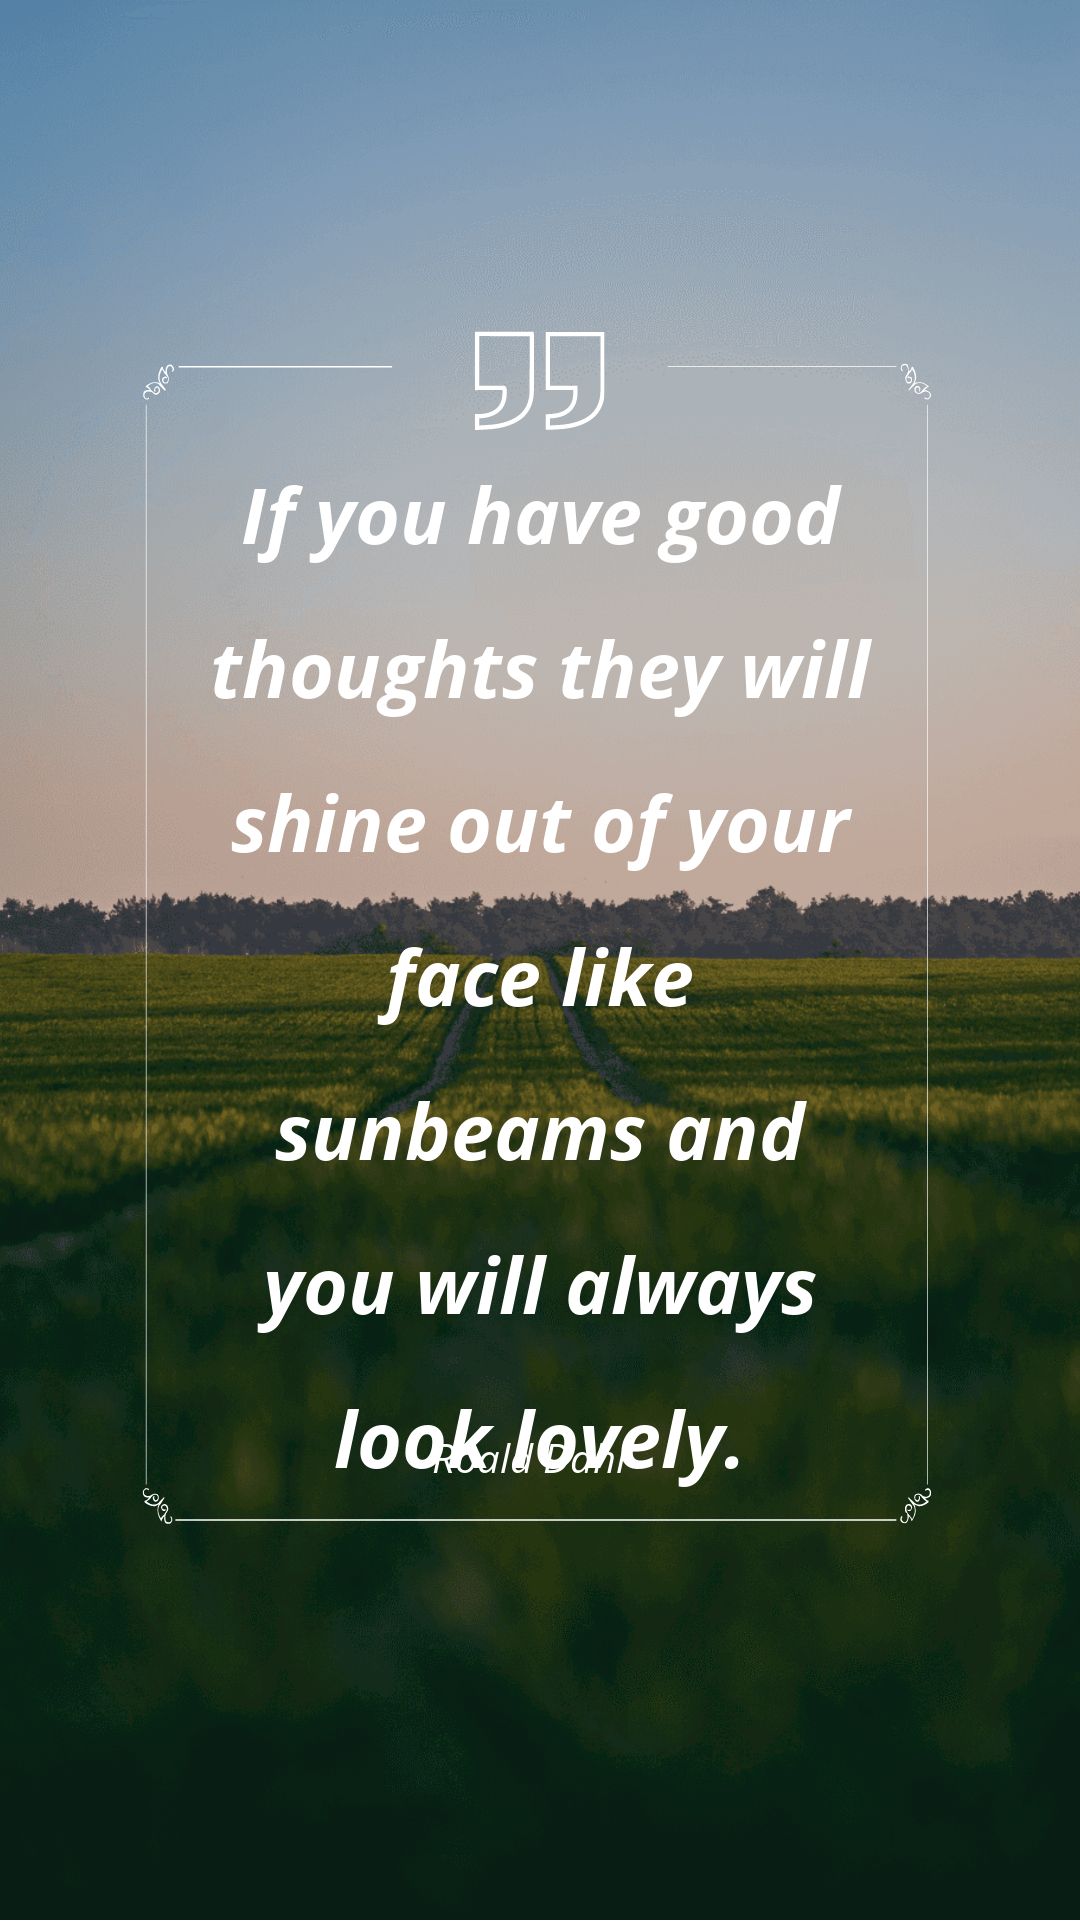 Roald Dahl - If you have good thoughts they will shine out of your face like sunbeams and you will always look lovely.